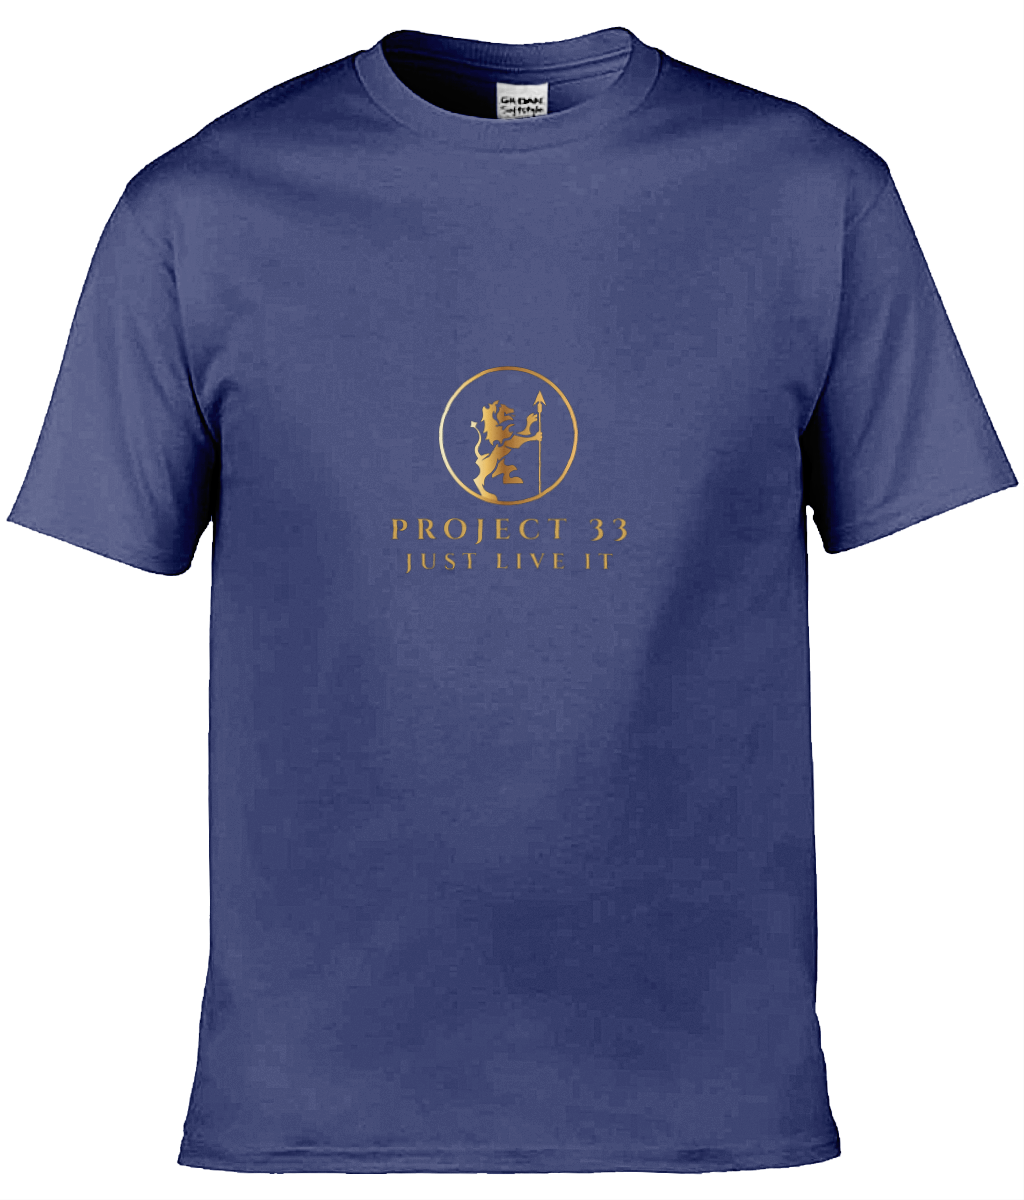 project 33 short sleeve Adult T-Shirt